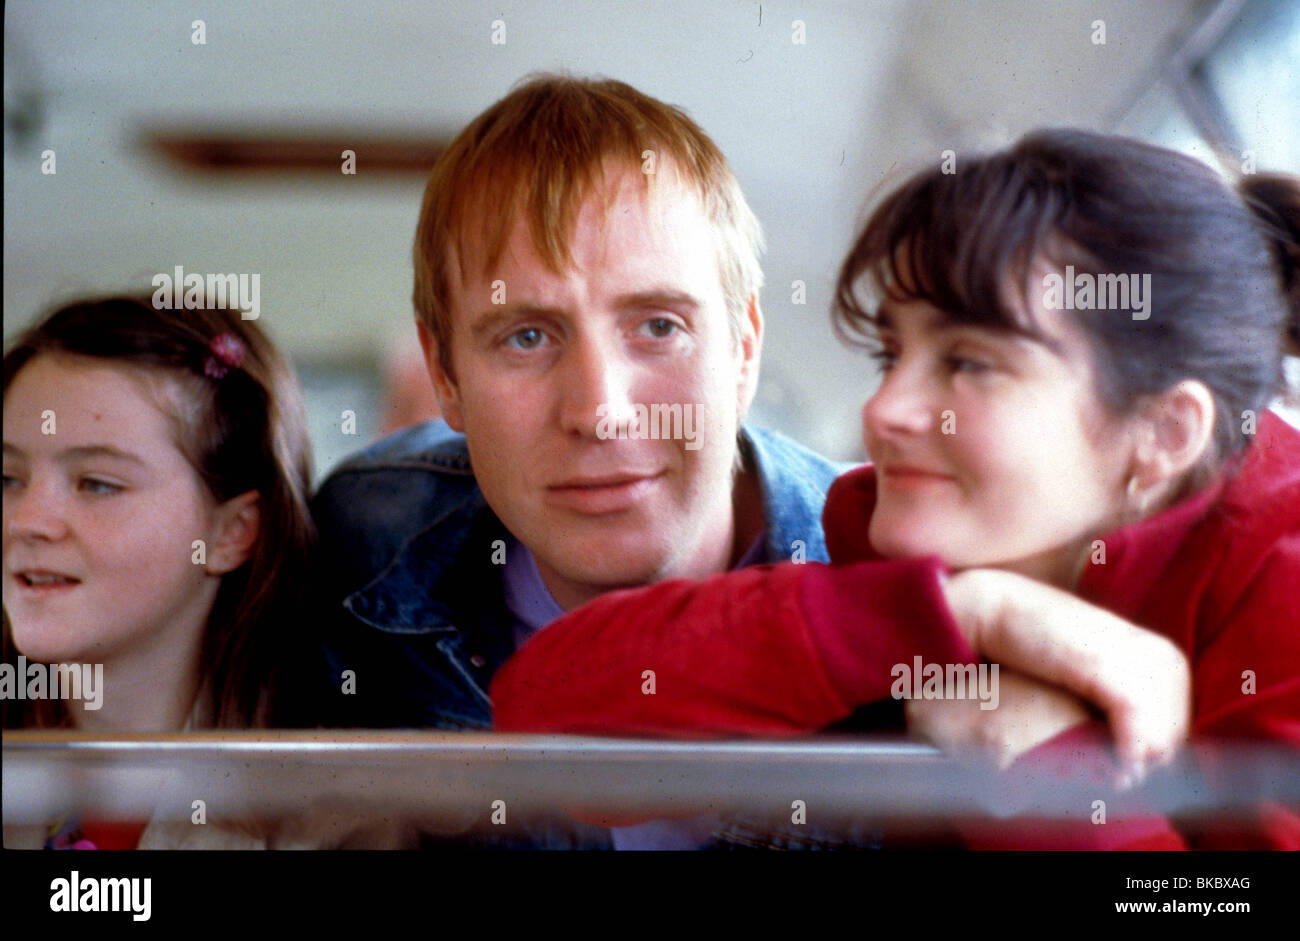 ONCE UPON A TIME IN THE MIDLANDS(2002) RHYS IFANS,SHIRLEY HENDERSON OTIM 001 Stock Photo